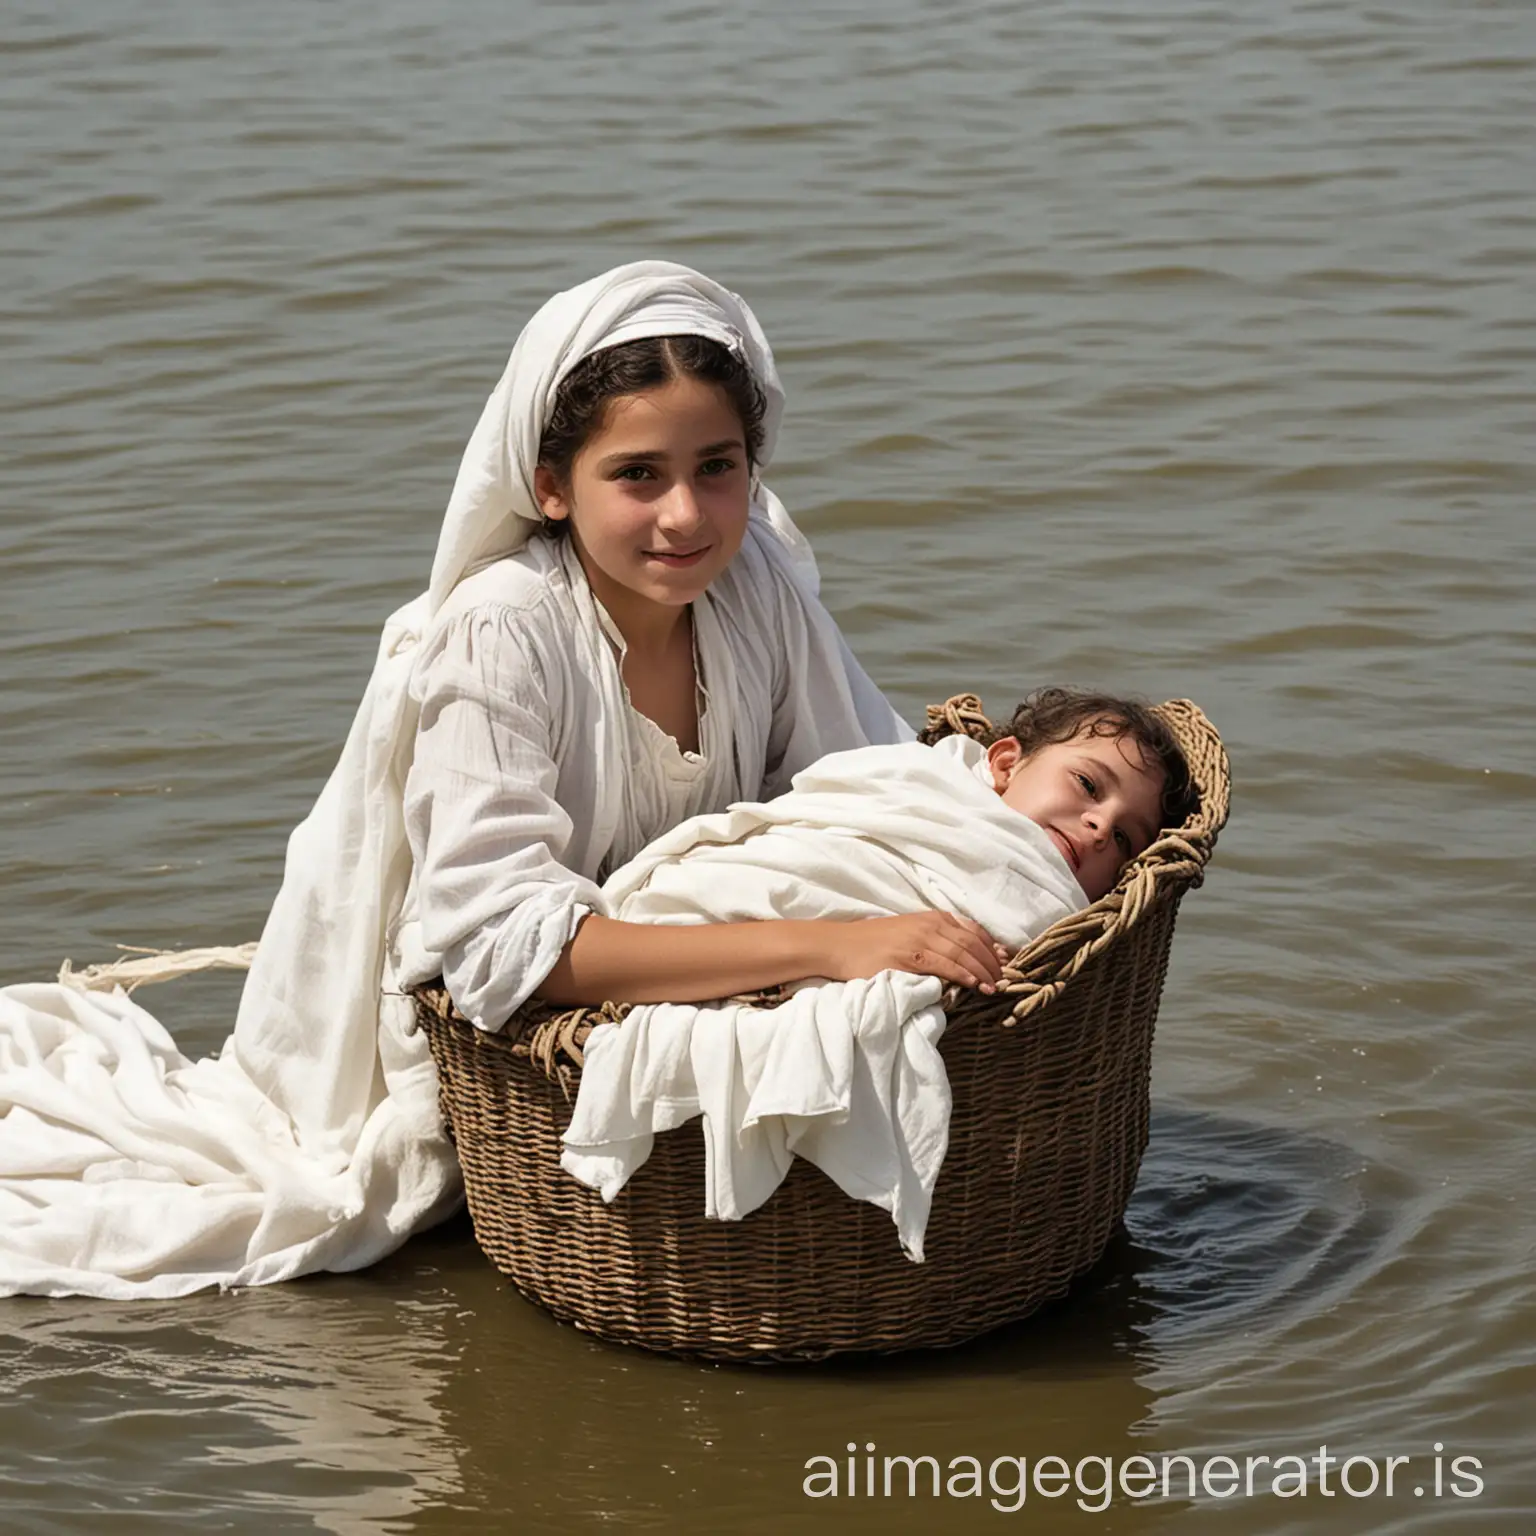 A young girl in old Jewish clothes, 12 years old, places a wicker basket containing a baby boy lying on his back, wrapped in a white cloth, in the Nile River.